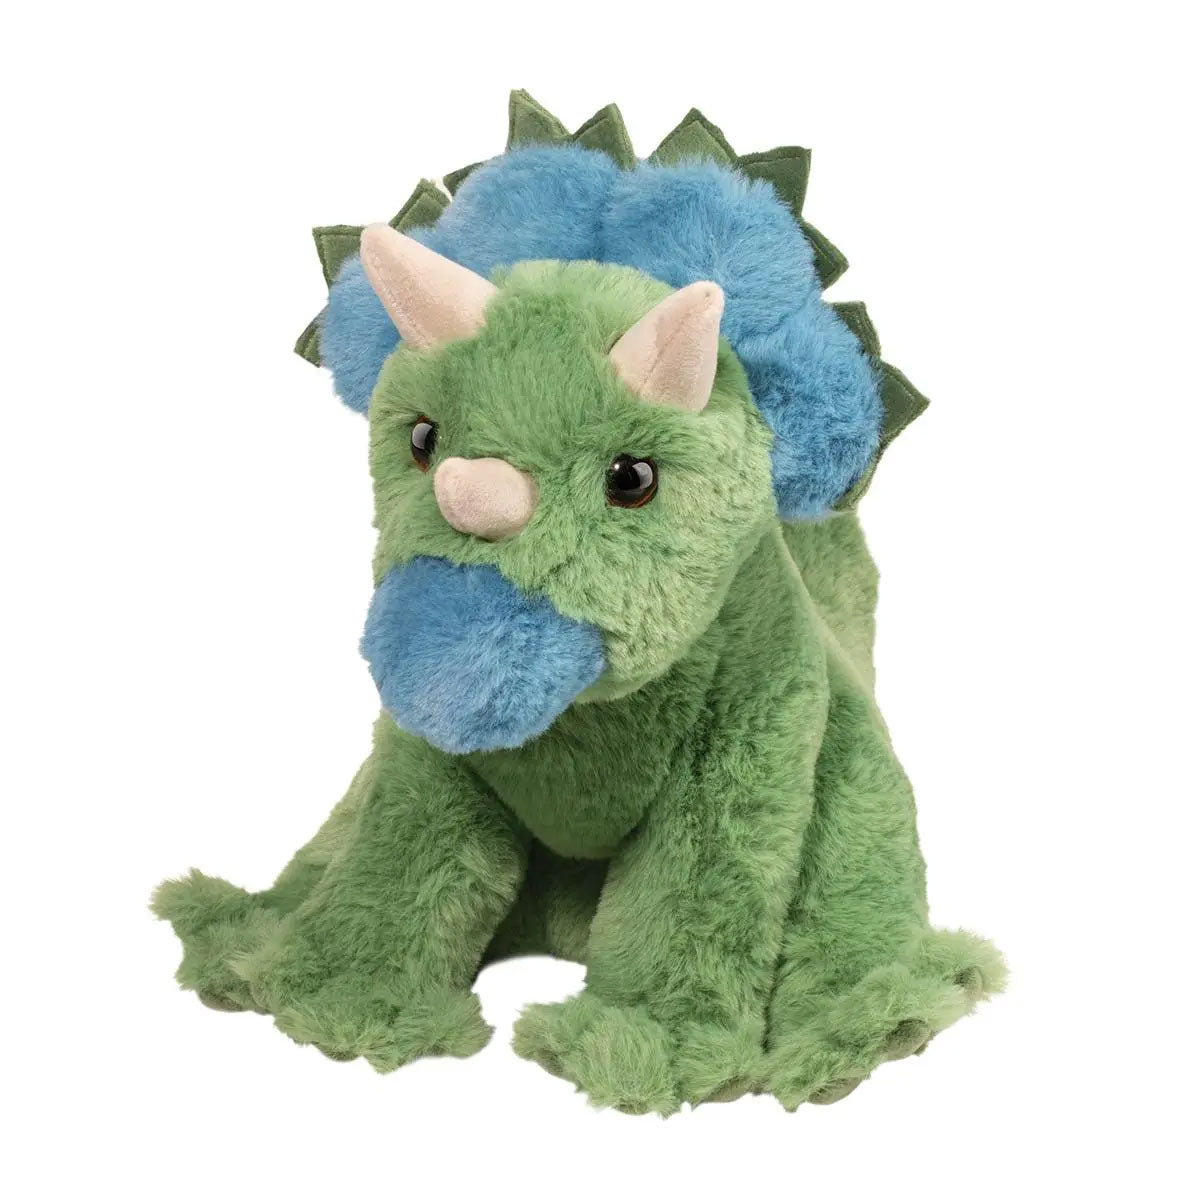 Roarie Soft Green Dino from Douglas Cuddle Toys